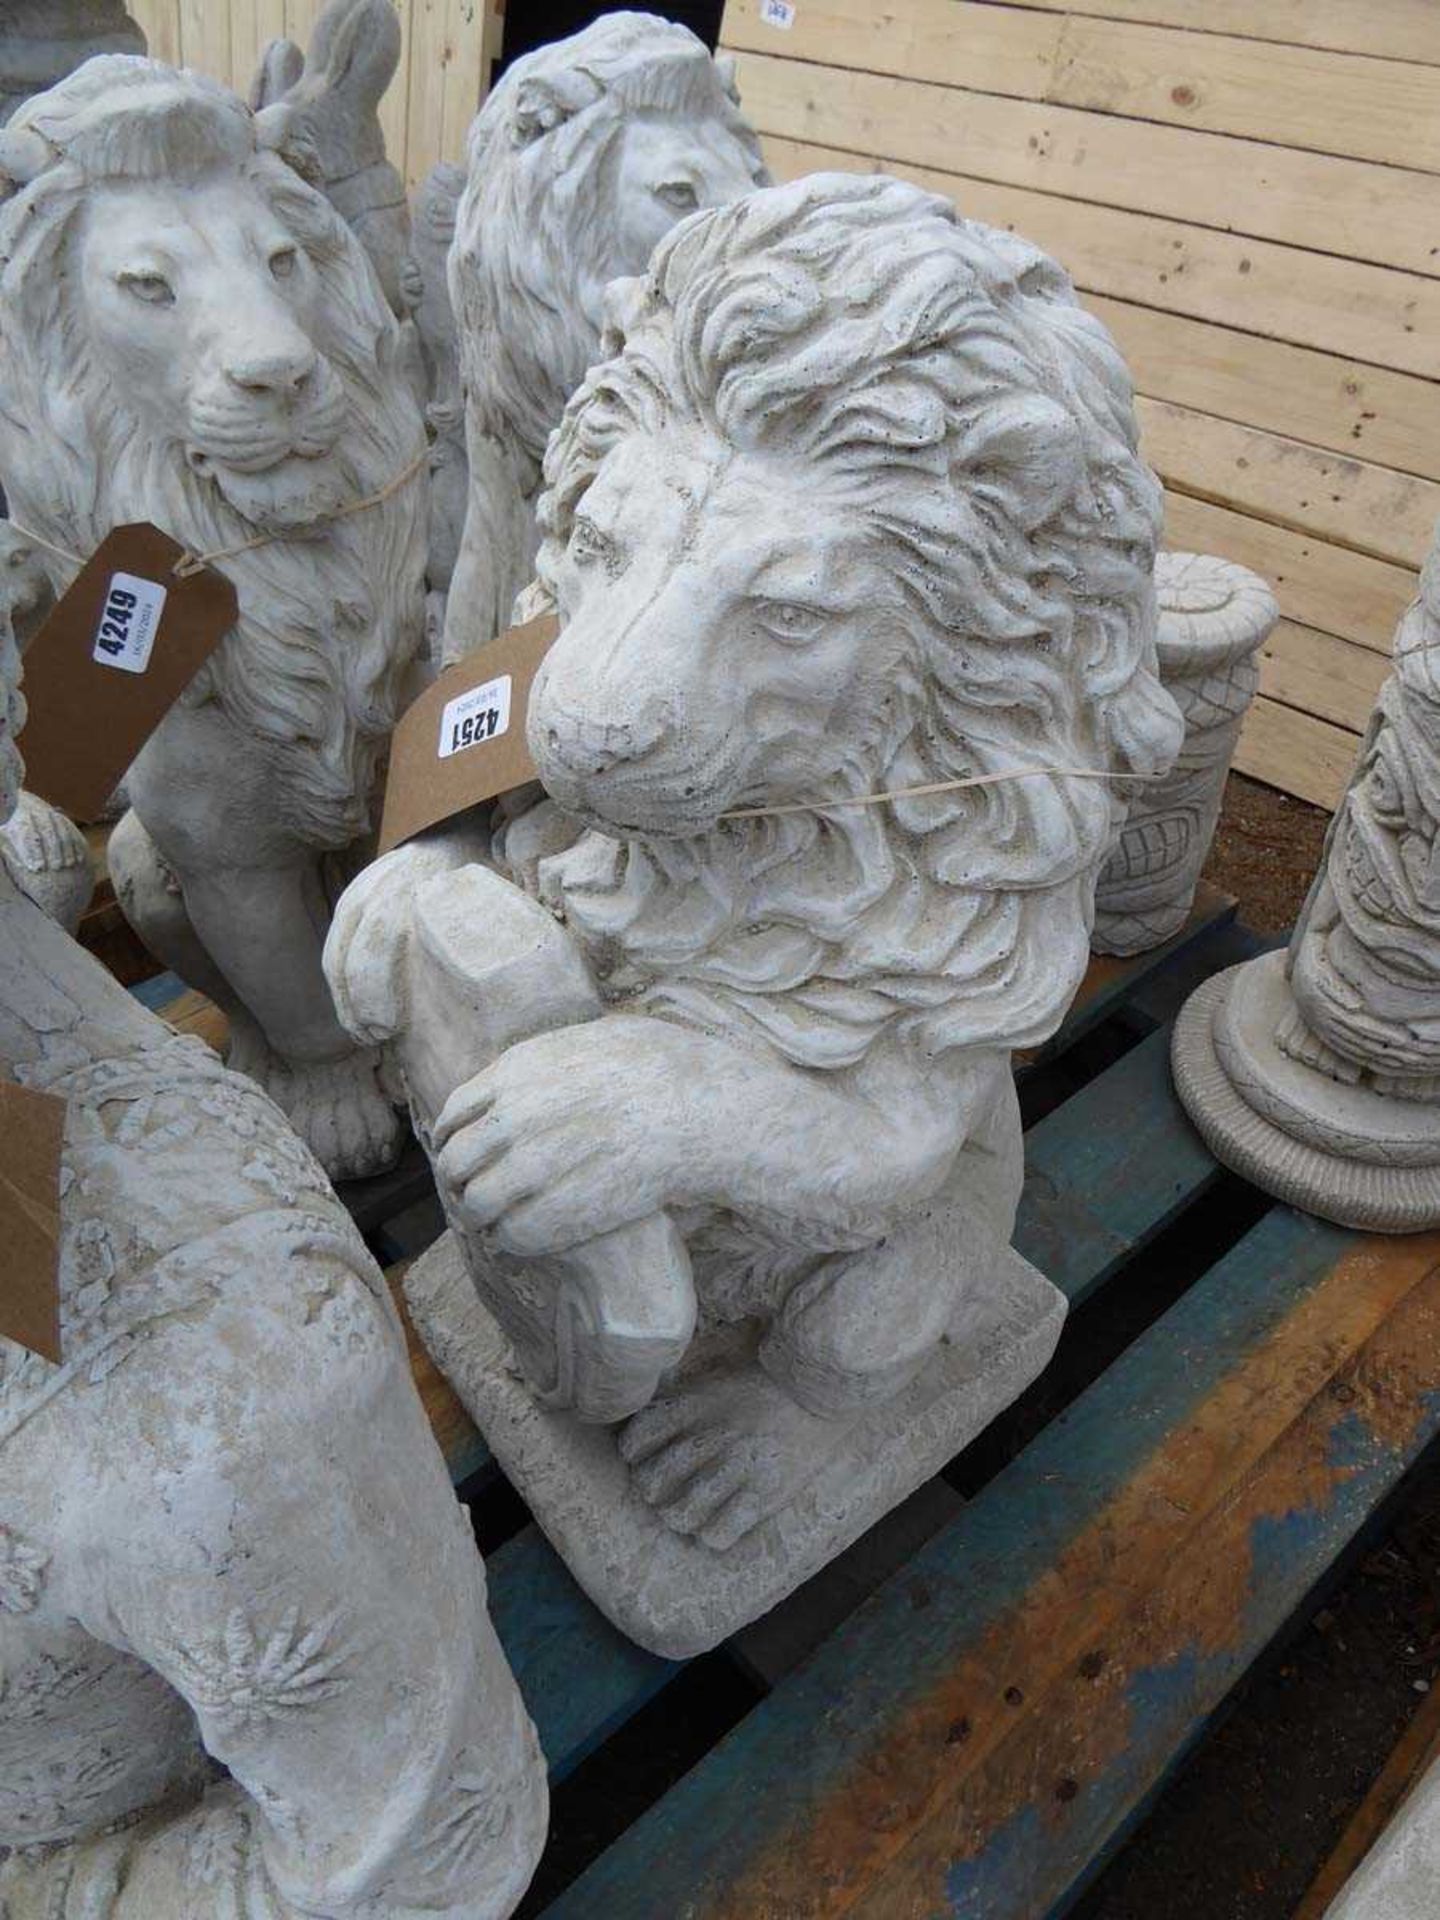 Large concrete lion with a welcome plaque